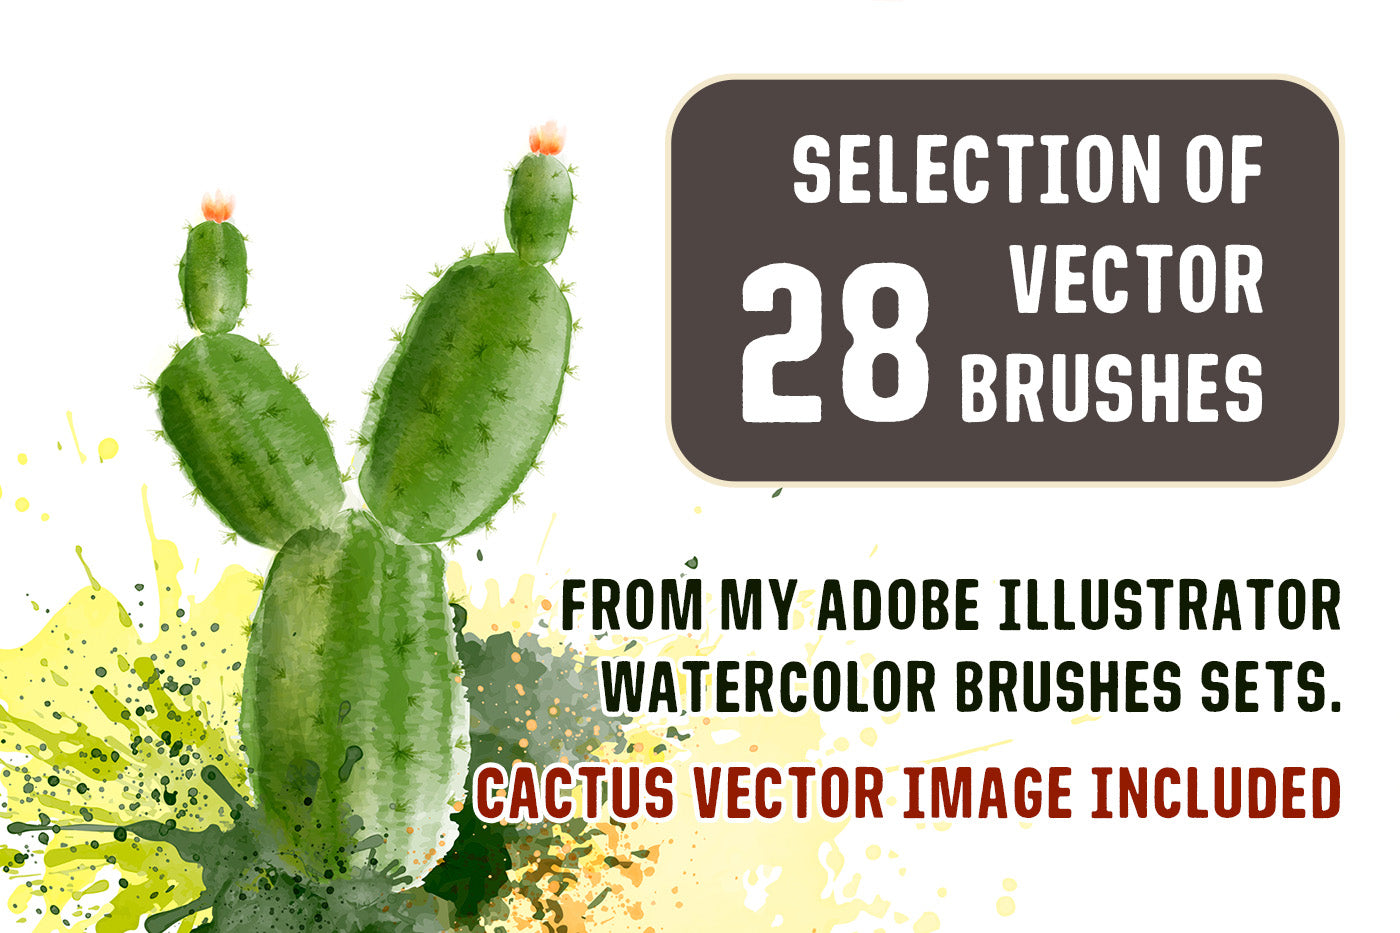 Cactus Image and 28 Vector Watercolor Brushes